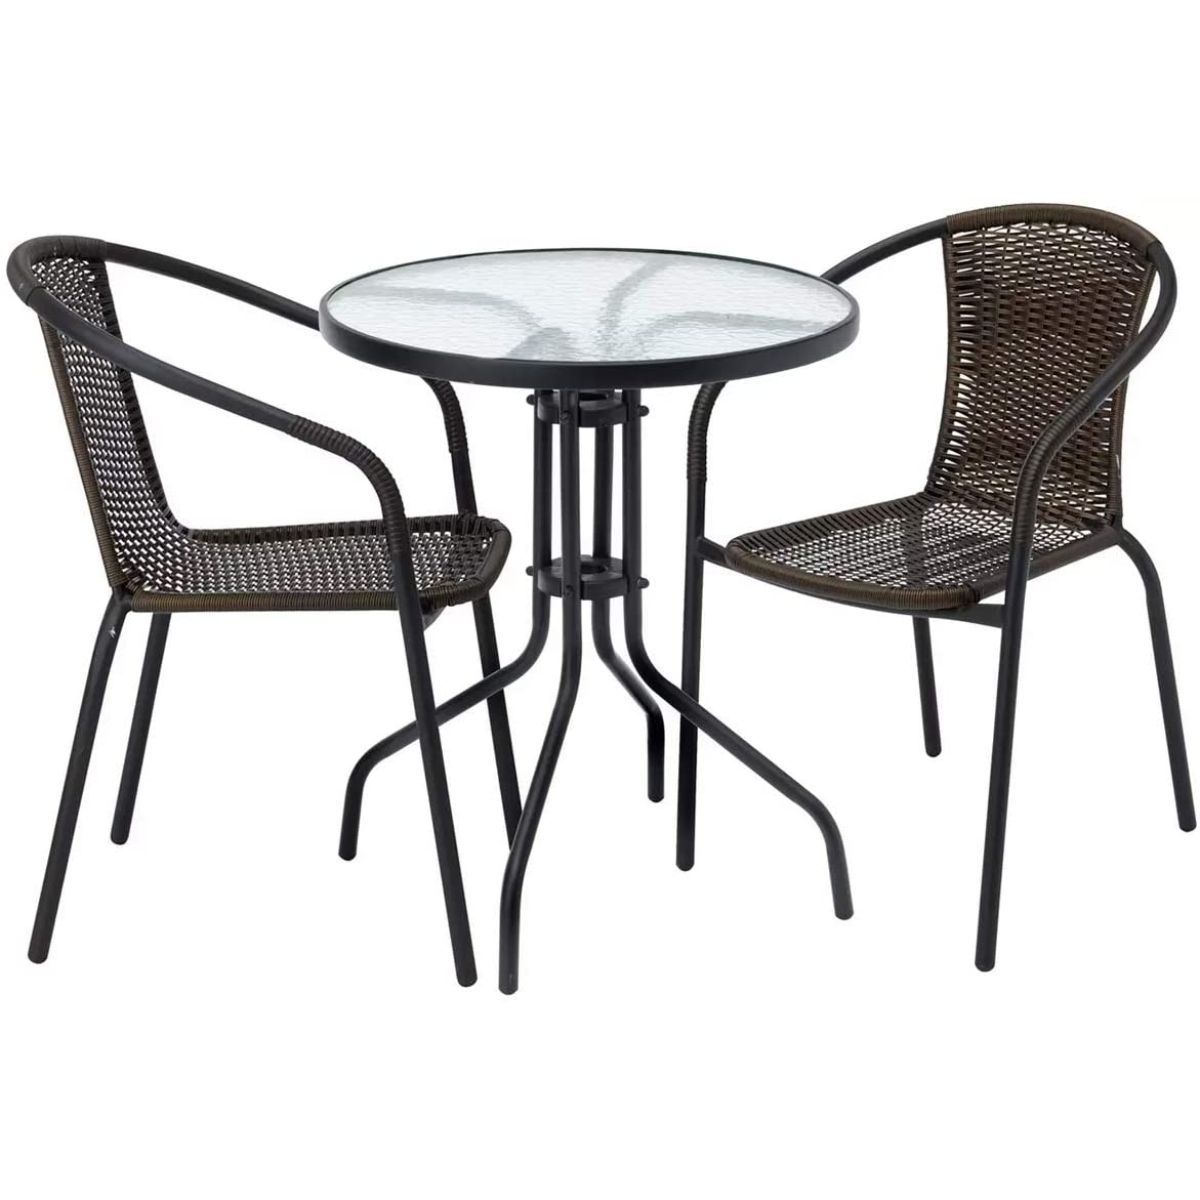 3 Piece Rattan Garden Patio Furniture Conservatory Glass Table & 2 Inside 3 Piece Outdoor Table And Chair Sets (View 12 of 15)